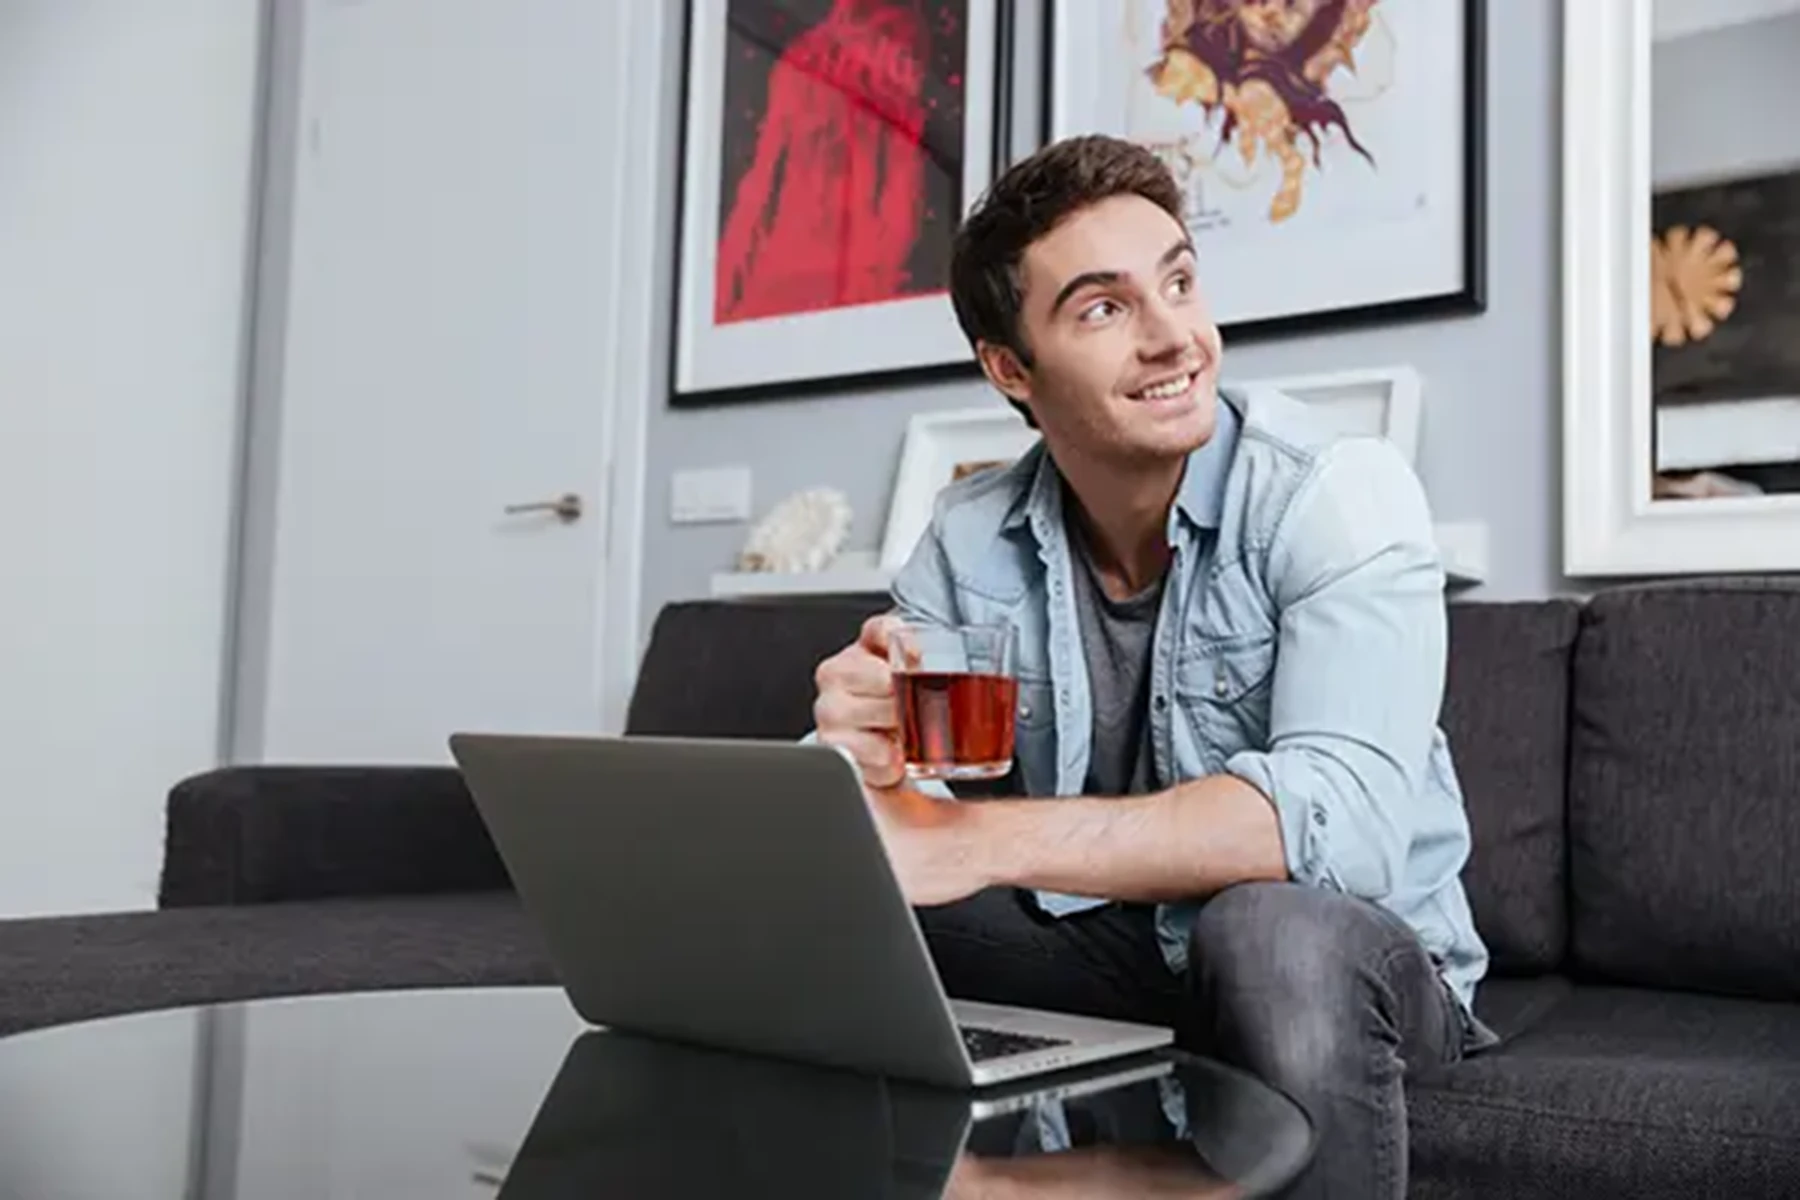 A man sits on a couch opposite a laptop and smiles while holding a cup of tea.